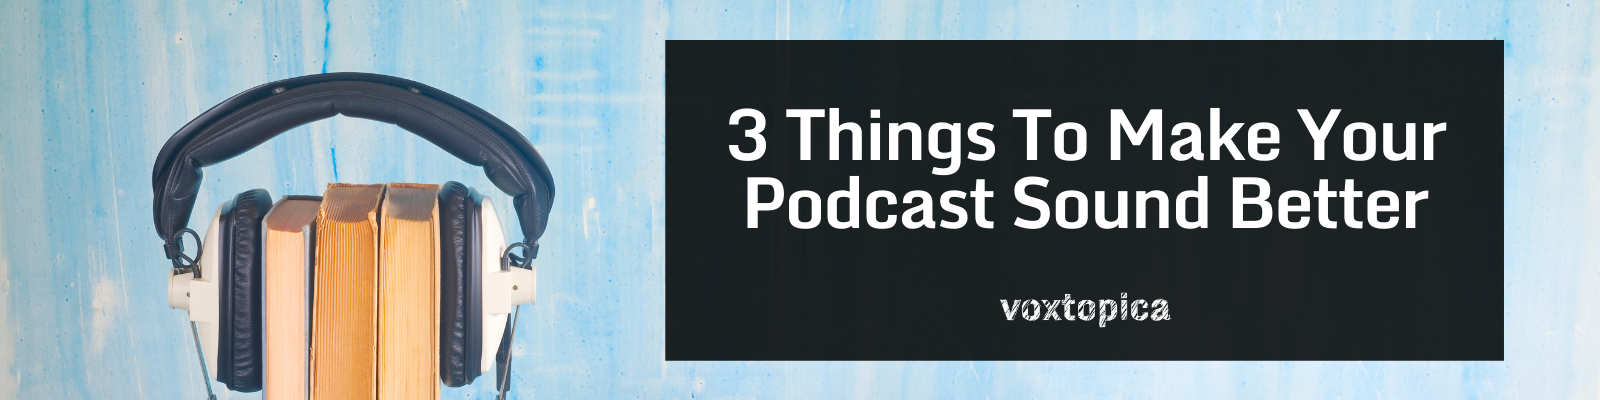 3 Things To Make Your Podcast Sound Better